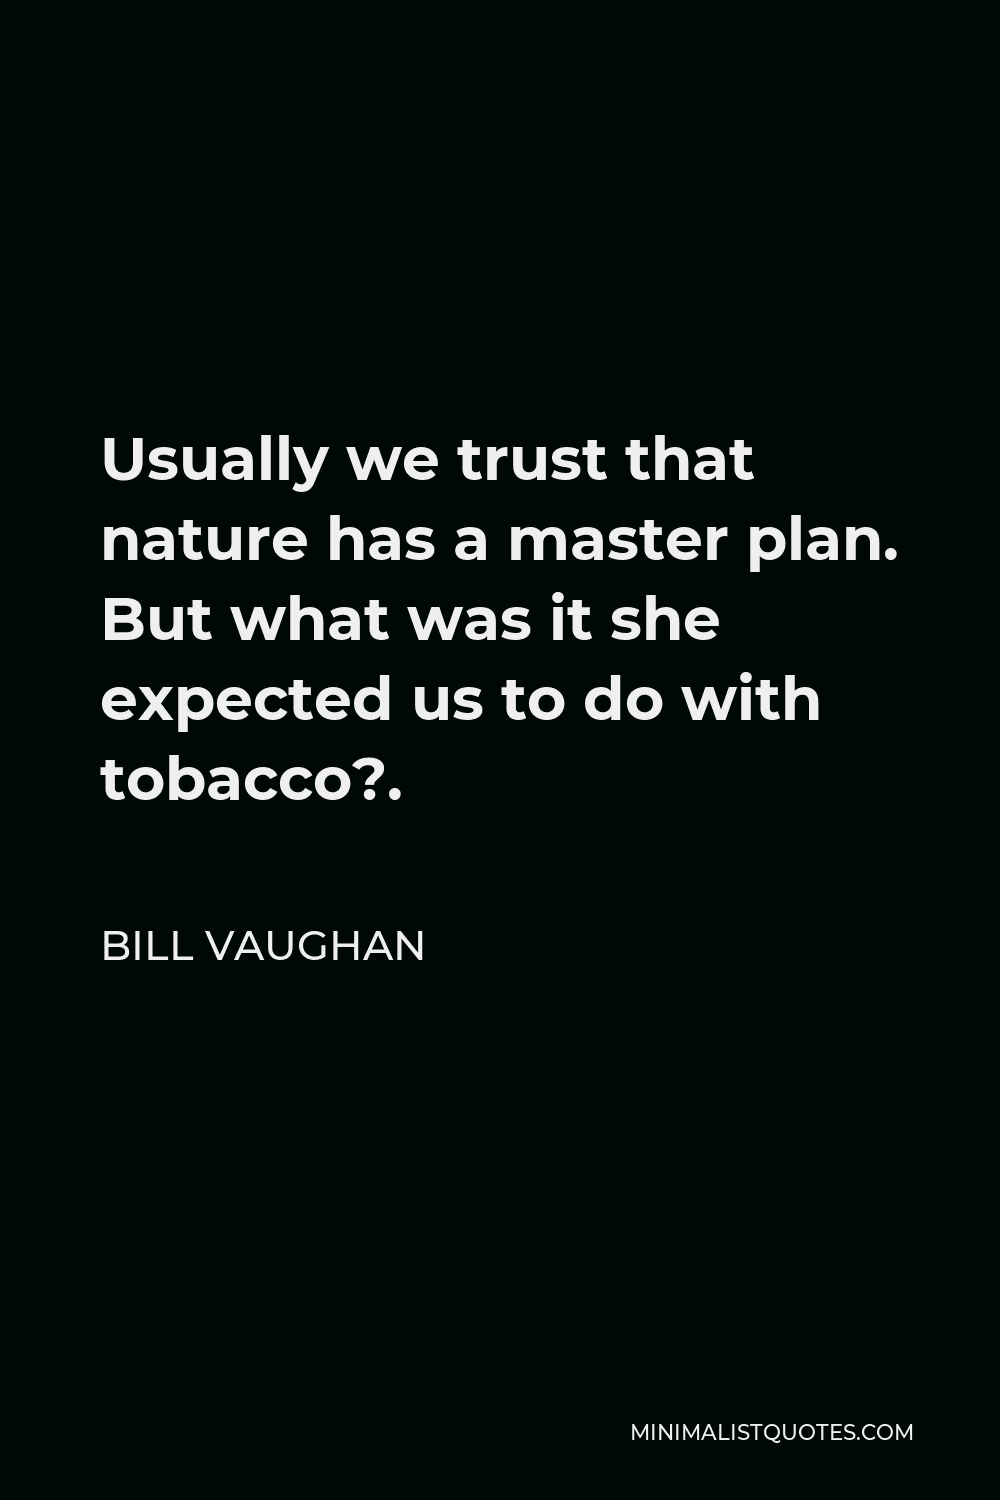 Bill Vaughan Quote - Usually we trust that nature has a master plan. But what was it she expected us to do with tobacco?.